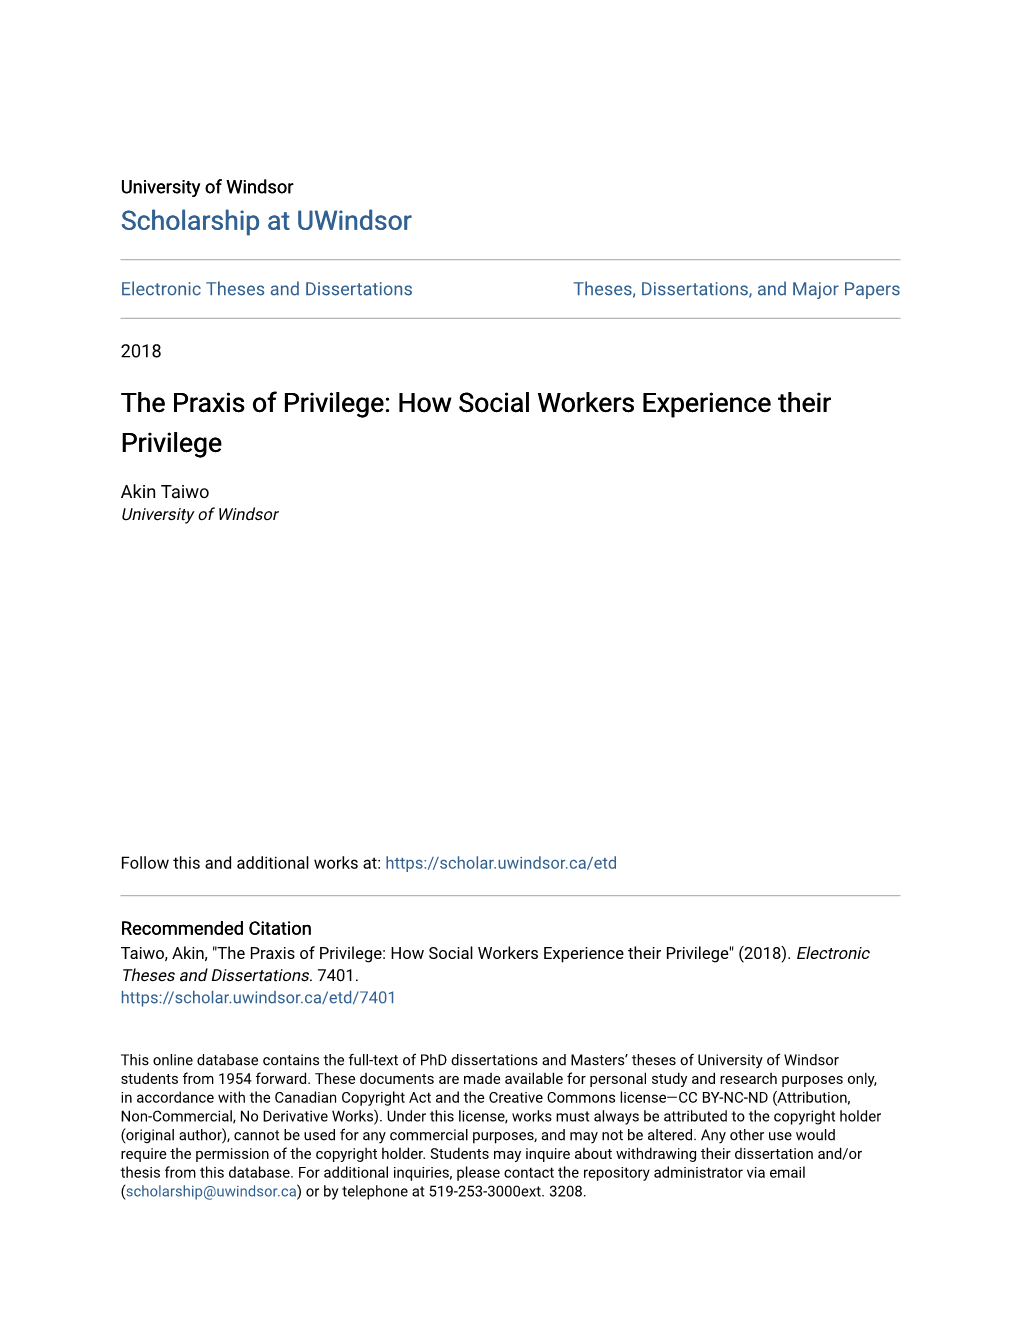 How Social Workers Experience Their Privilege